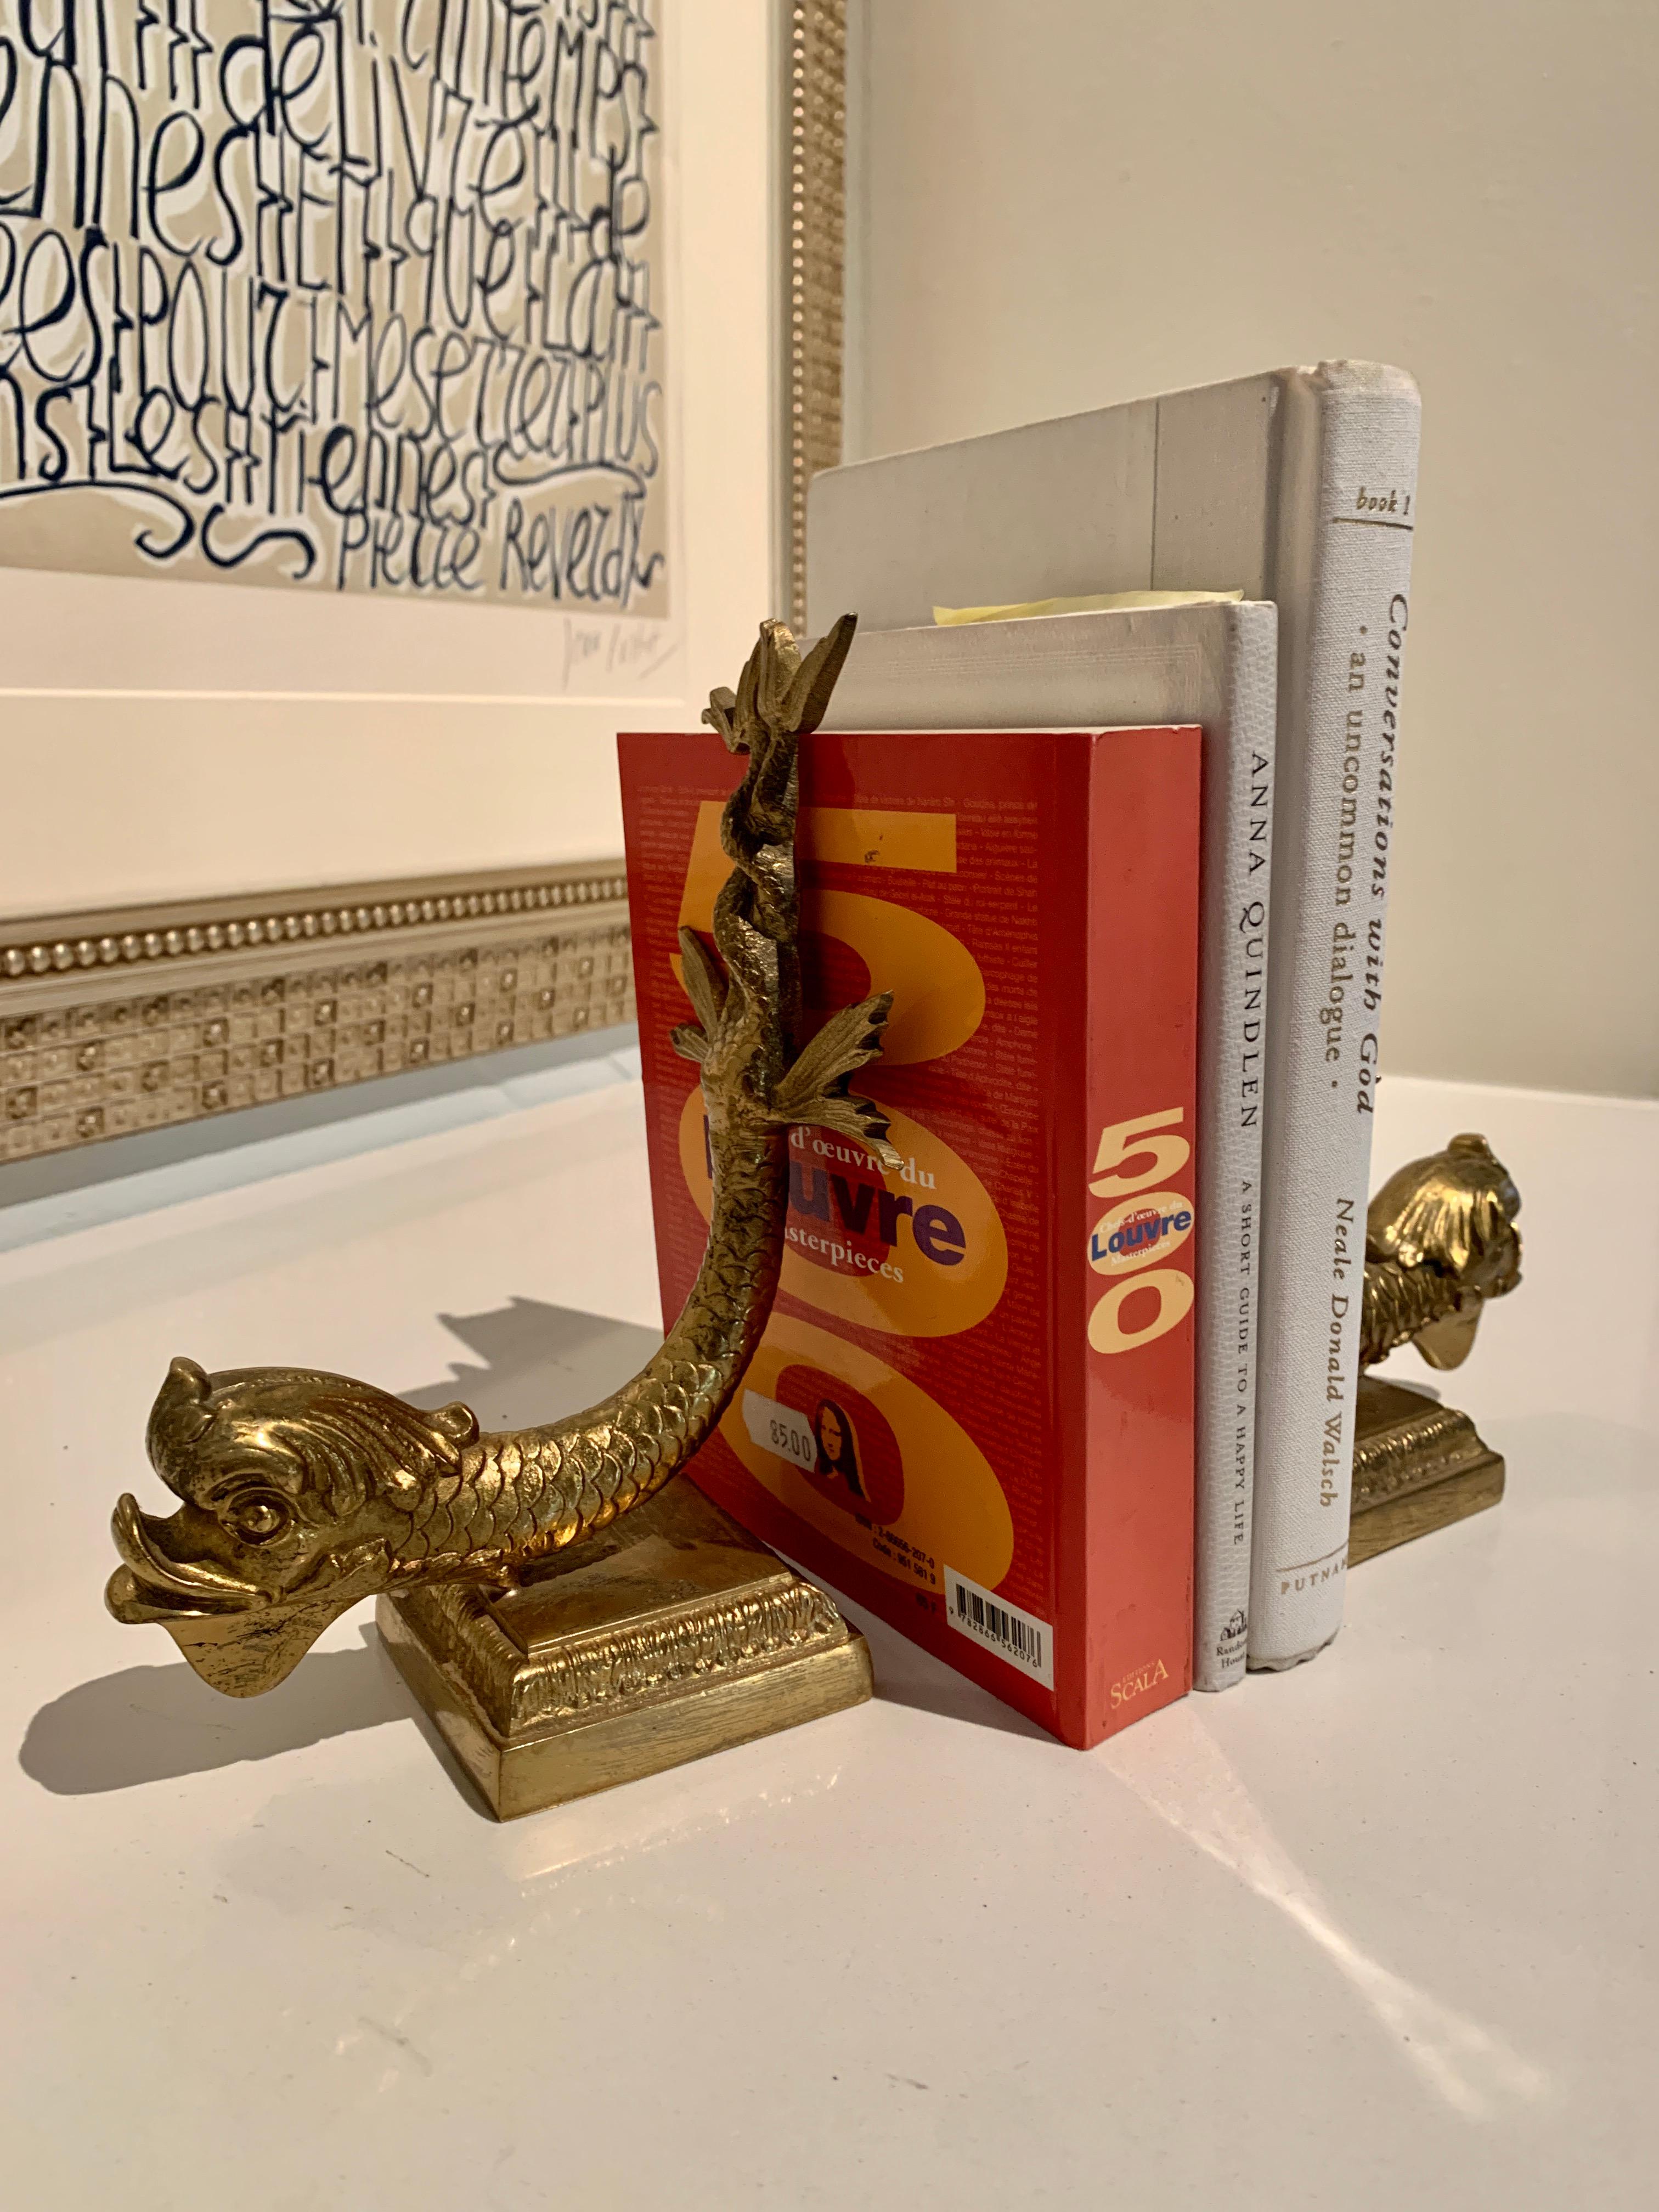 Pair of solid brass Dolphin serpent bookends. A compliment to any bookshelf or desk. Classic Mid Century figures, the brass weight and style make them a very sophisticated pair. Made in Italy.